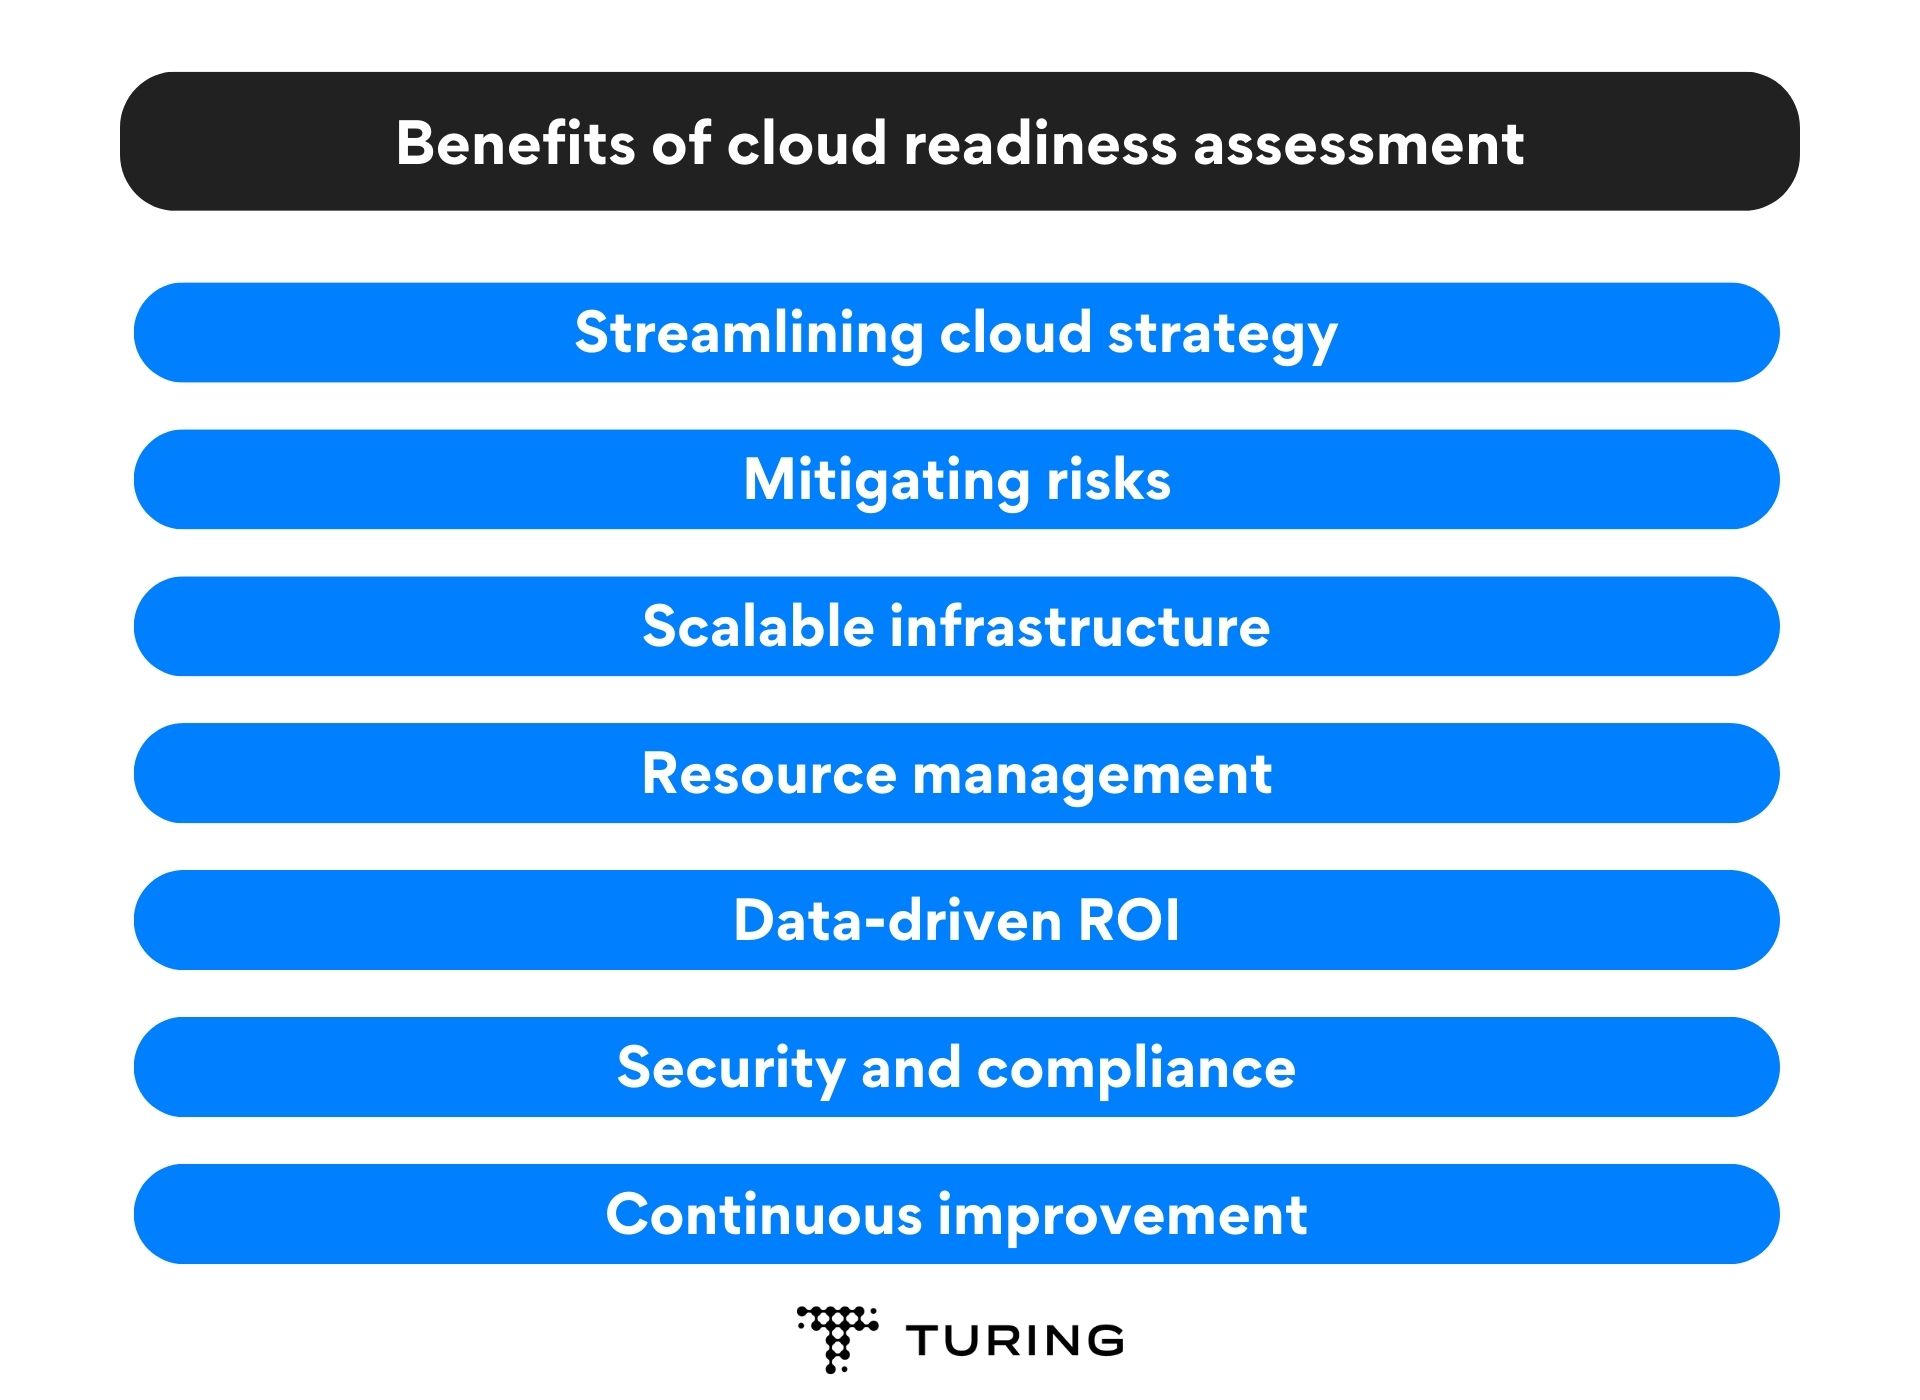 Benefits of cloud readiness assessment